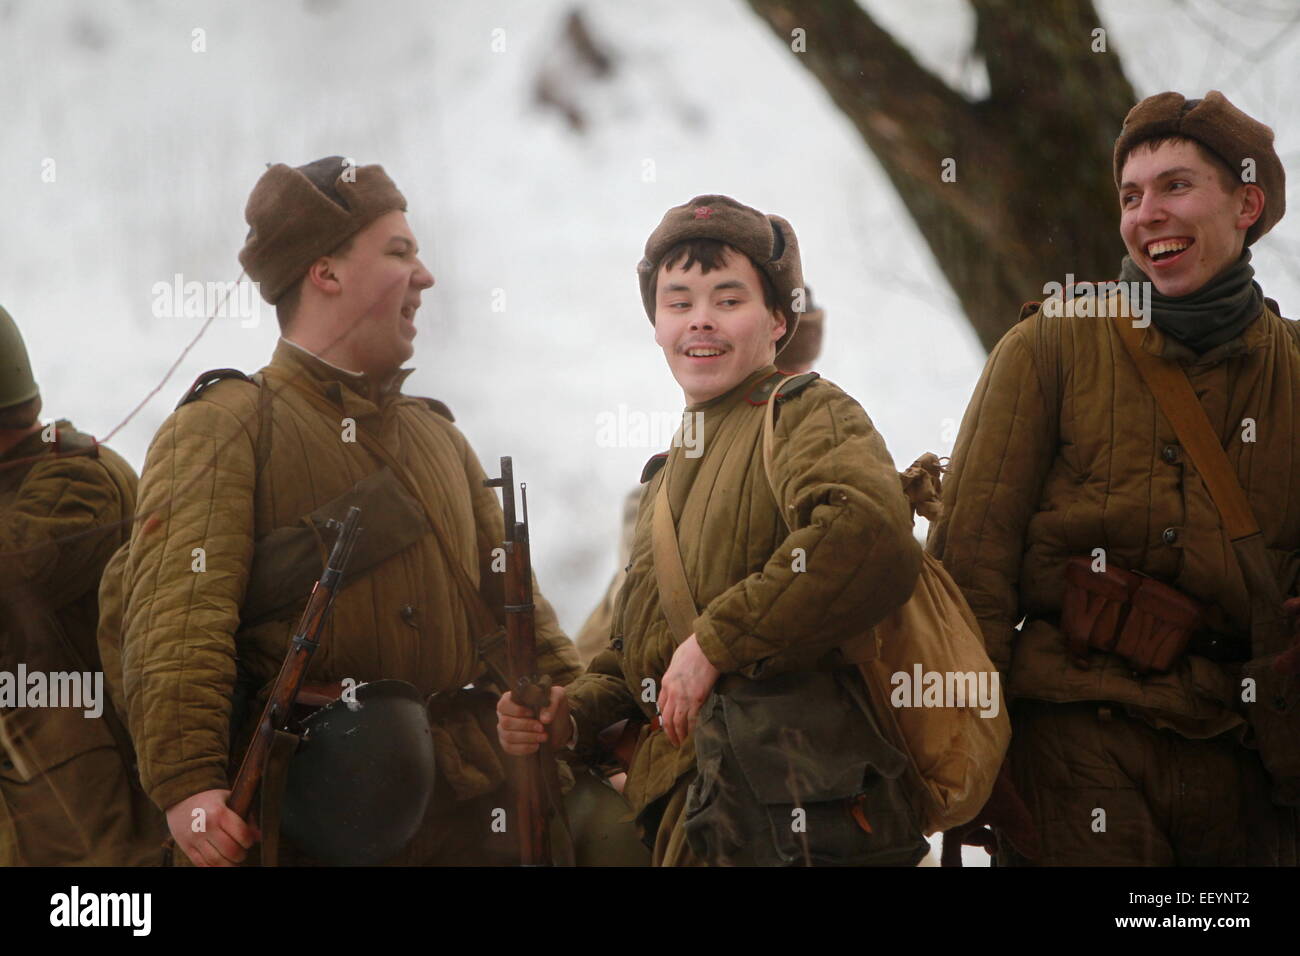 Beijing, China. 18th Jan, 2015. Reenactors dressed as World War II (WWII) Soviet Red Army troops take part in a battle reconstruction marking the 72nd anniversary of the breakthrough of Leningrad (St. Petersburg) from the Nazi blockade in WWII on Jan. 18, 2015, in St. Petersburg, Russia. © Lu Jinbo/Xinhua/Alamy Live News Stock Photo